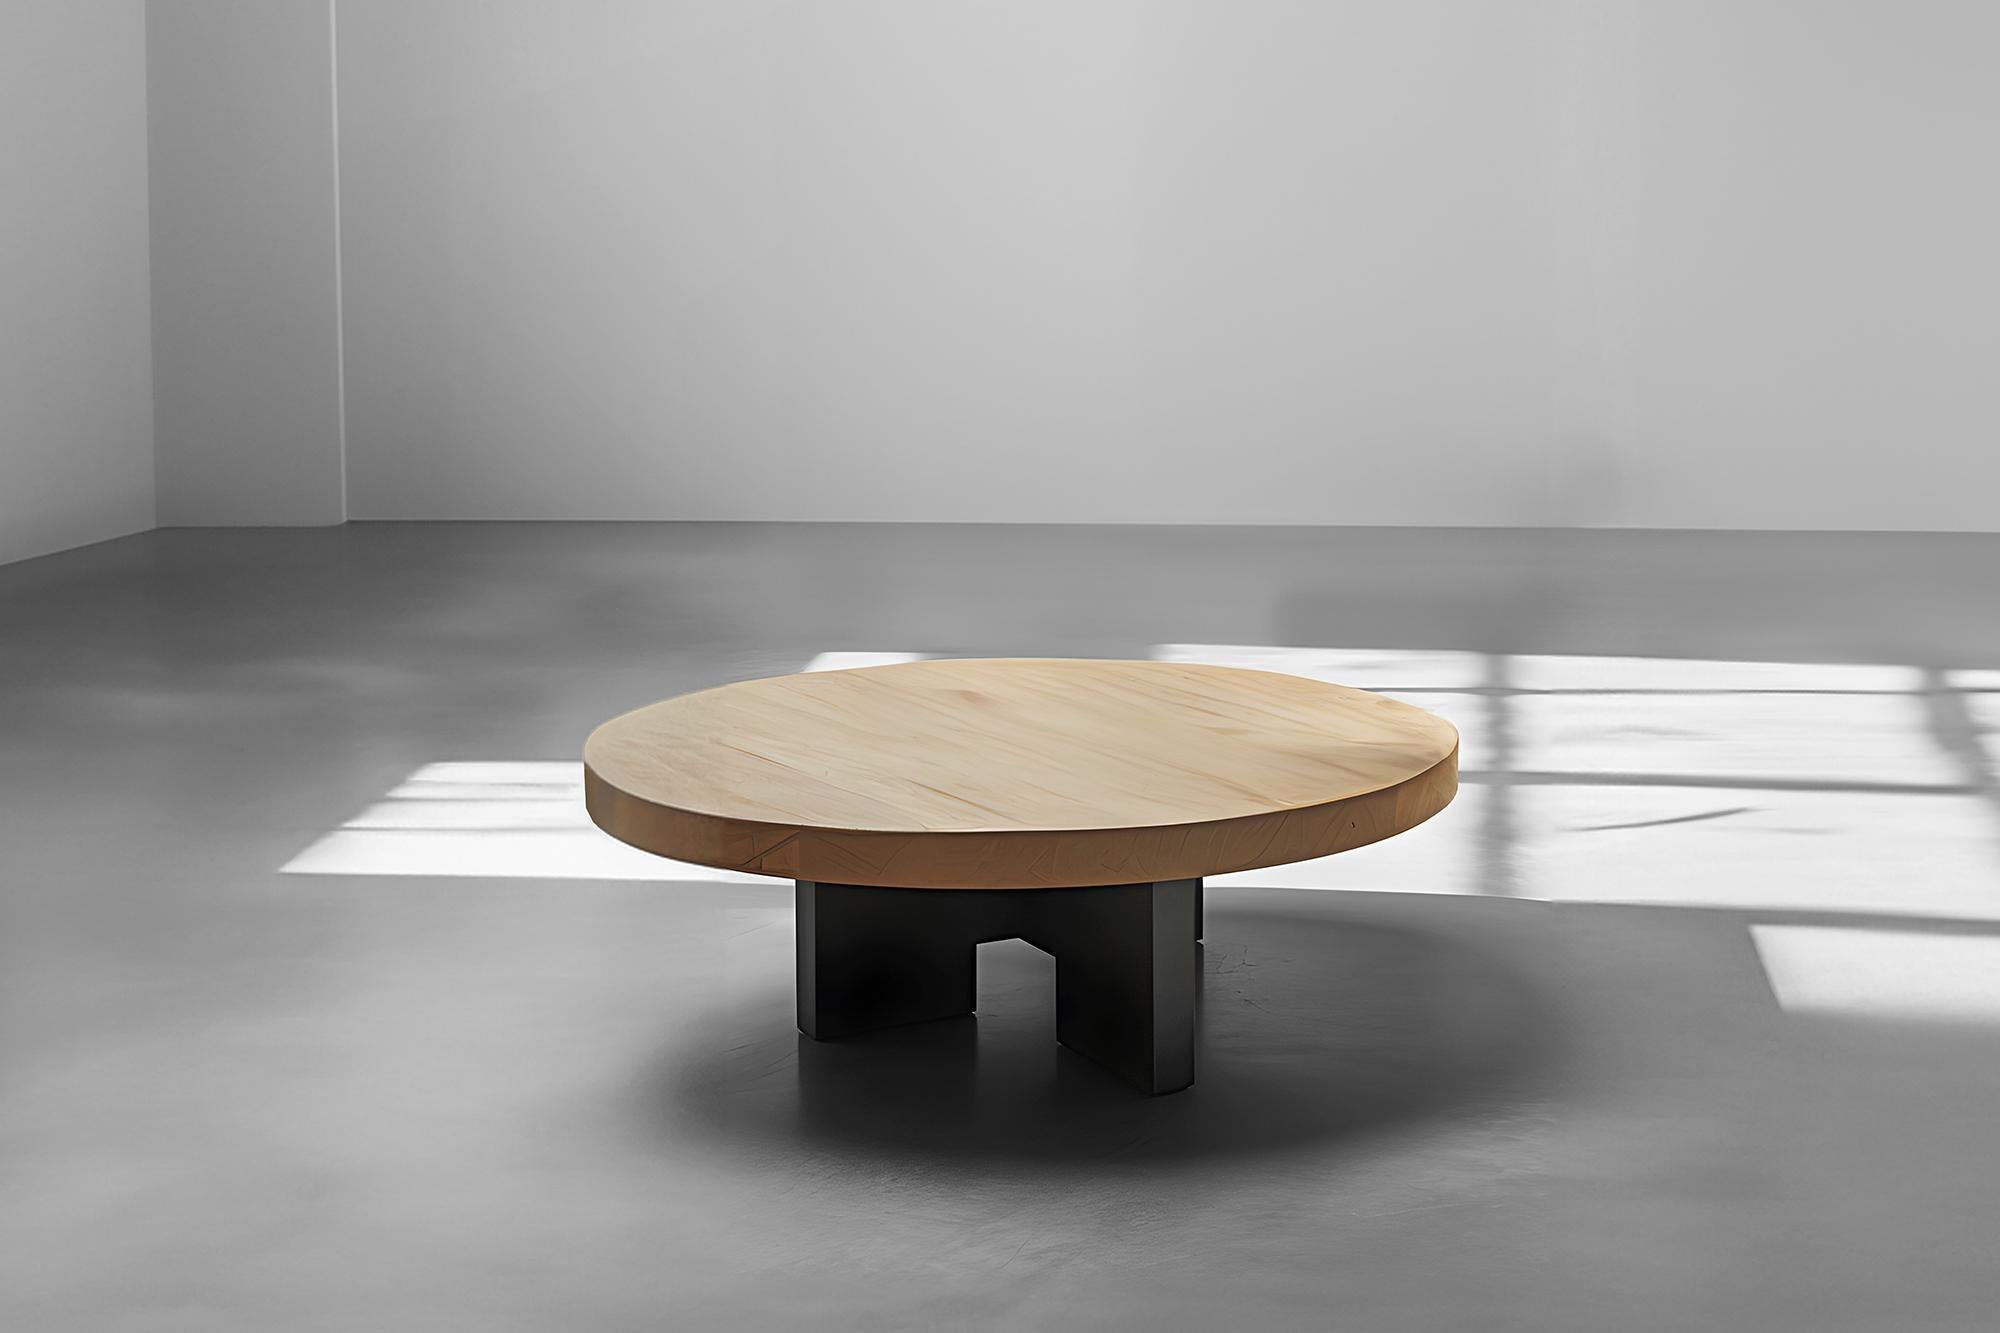 Fundamenta Geometric Coffee Table 56 Round Solid Wood, Modern Style by NONO


Sculptural coffee table made of solid wood with a natural water-based or black tinted finish. Due to the nature of the production process, each piece may vary in grain,